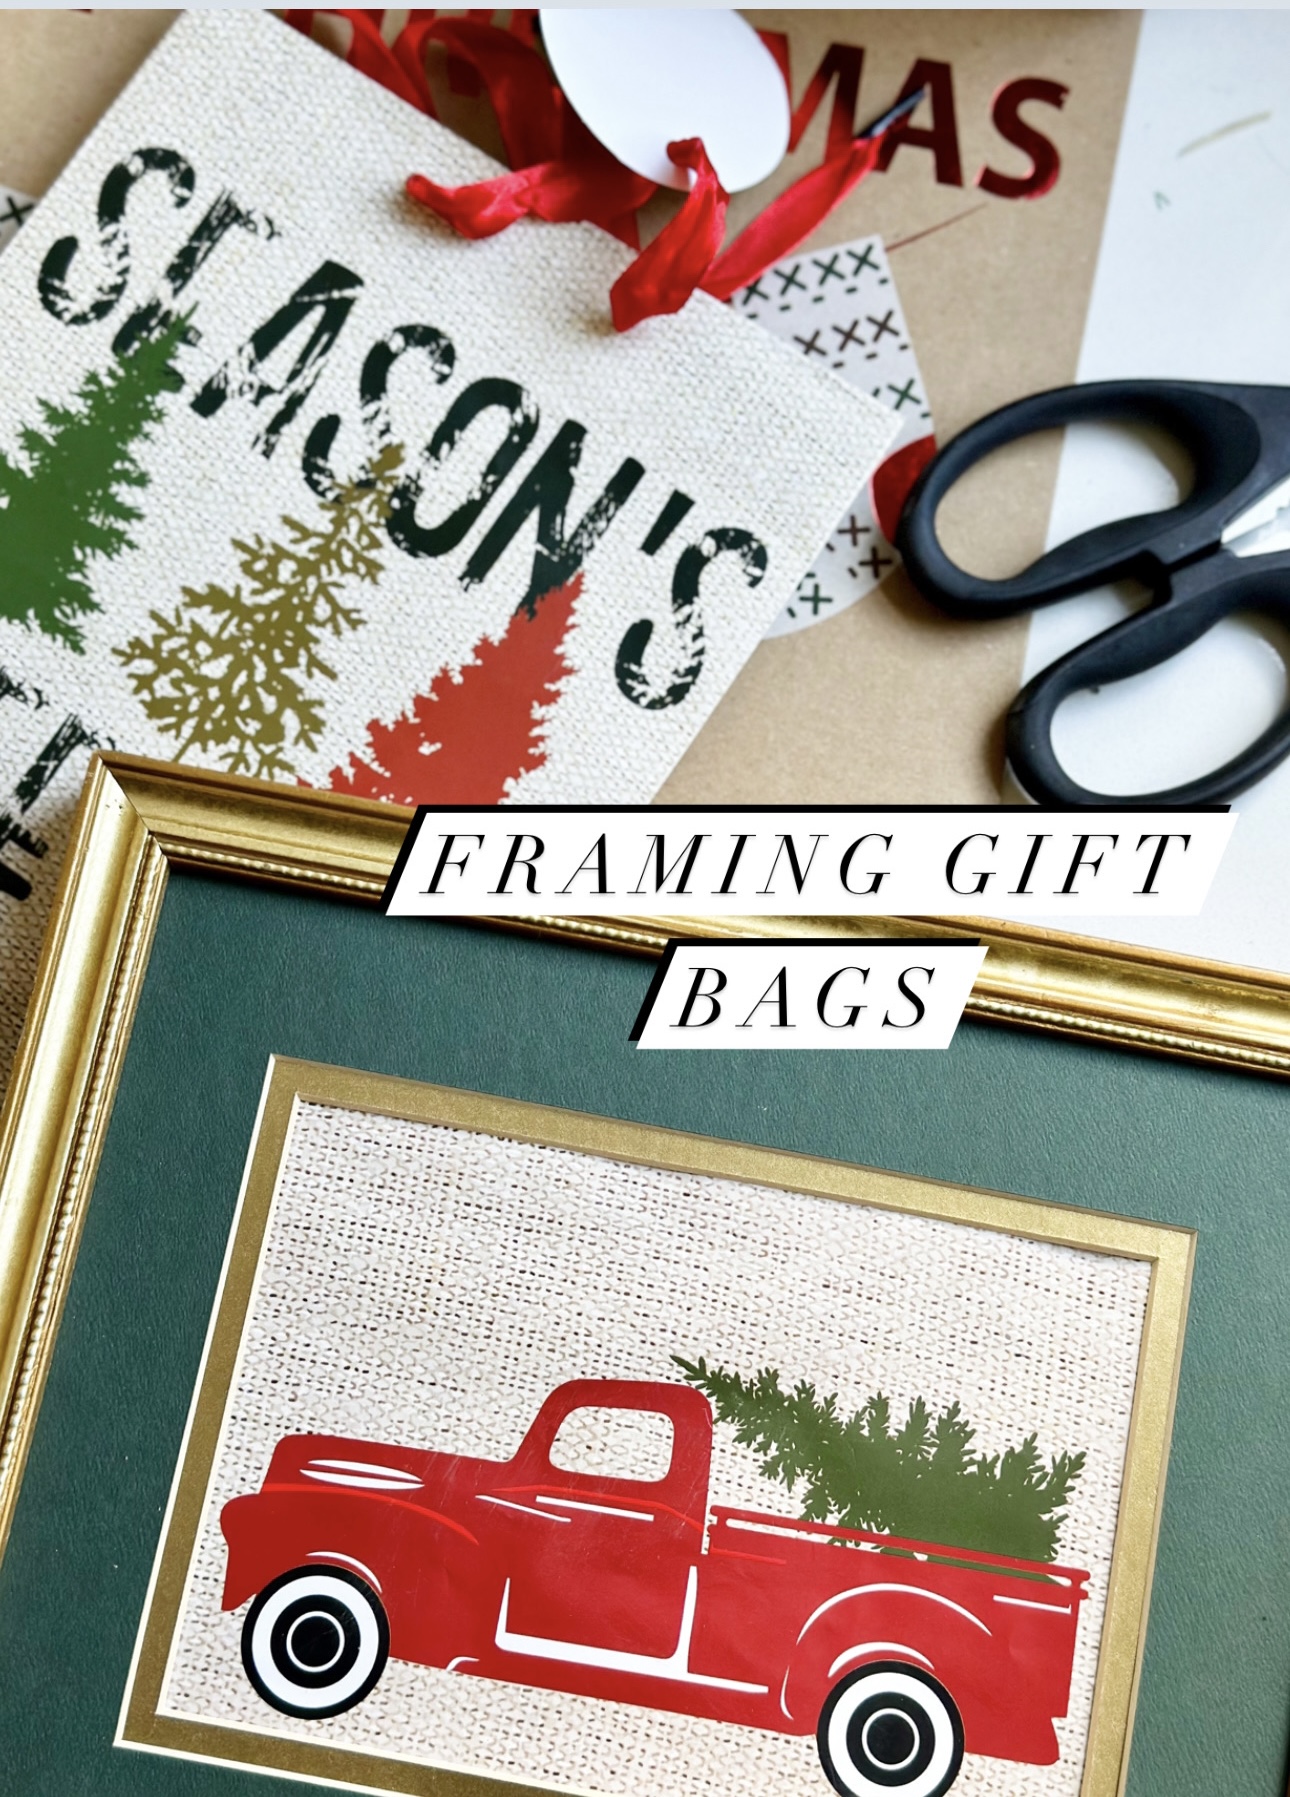 easy and budget friendly ways to decorate for christmas, decorating with bows, decorating art for christmas, christmas decor ideas, bows on frames, decorating art for christmas, christmas diy, framed gift bags, framing christmas gift bags